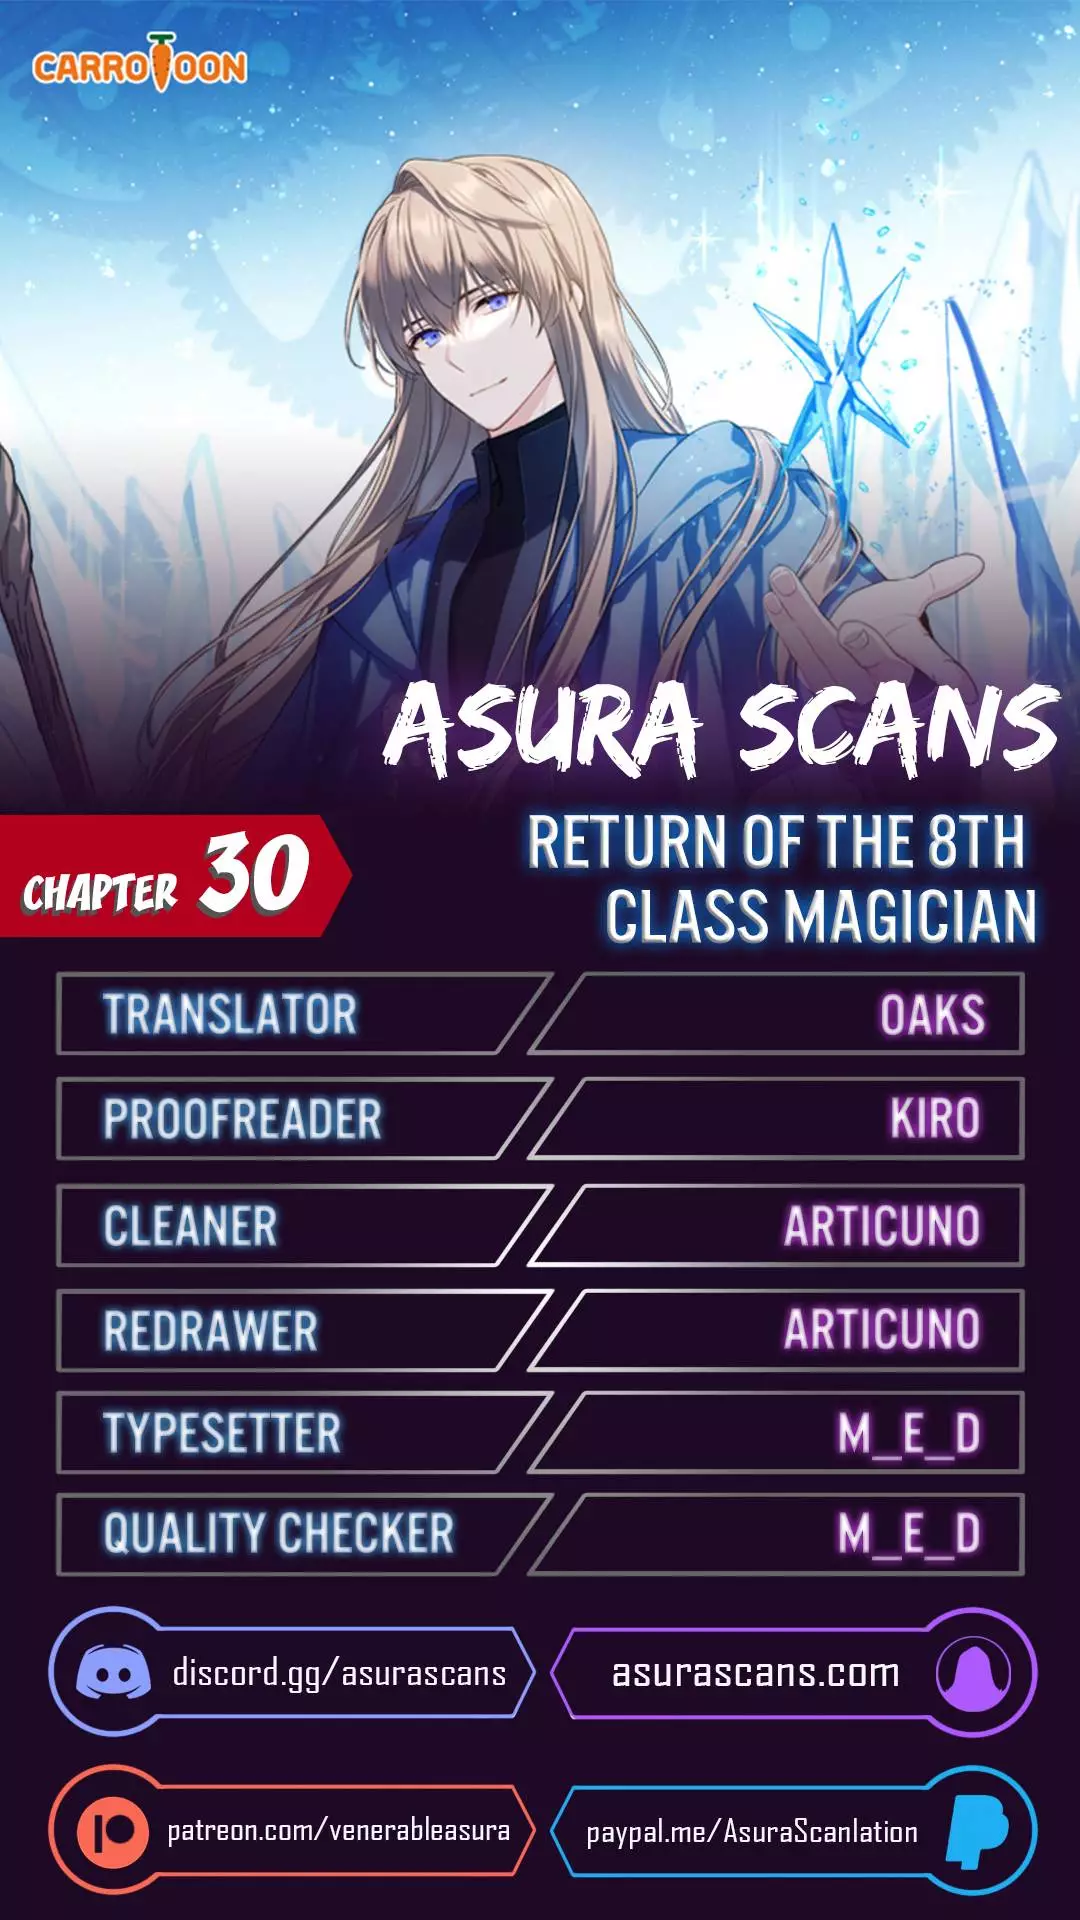 The Return Of The 8Th Class Magician - 30 page 1-aa6aeb84